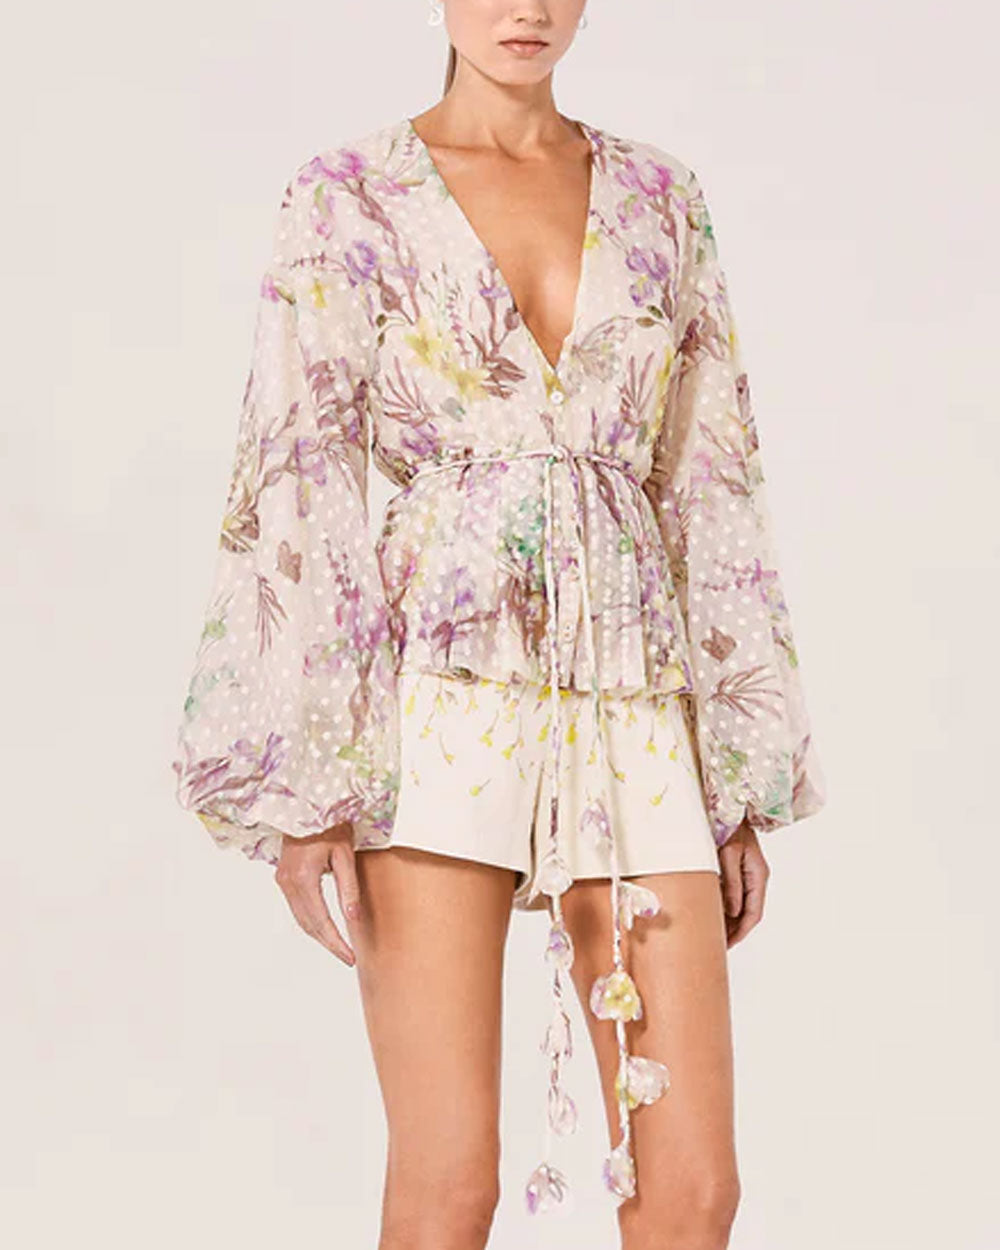 Floral Embroidered Gia Top